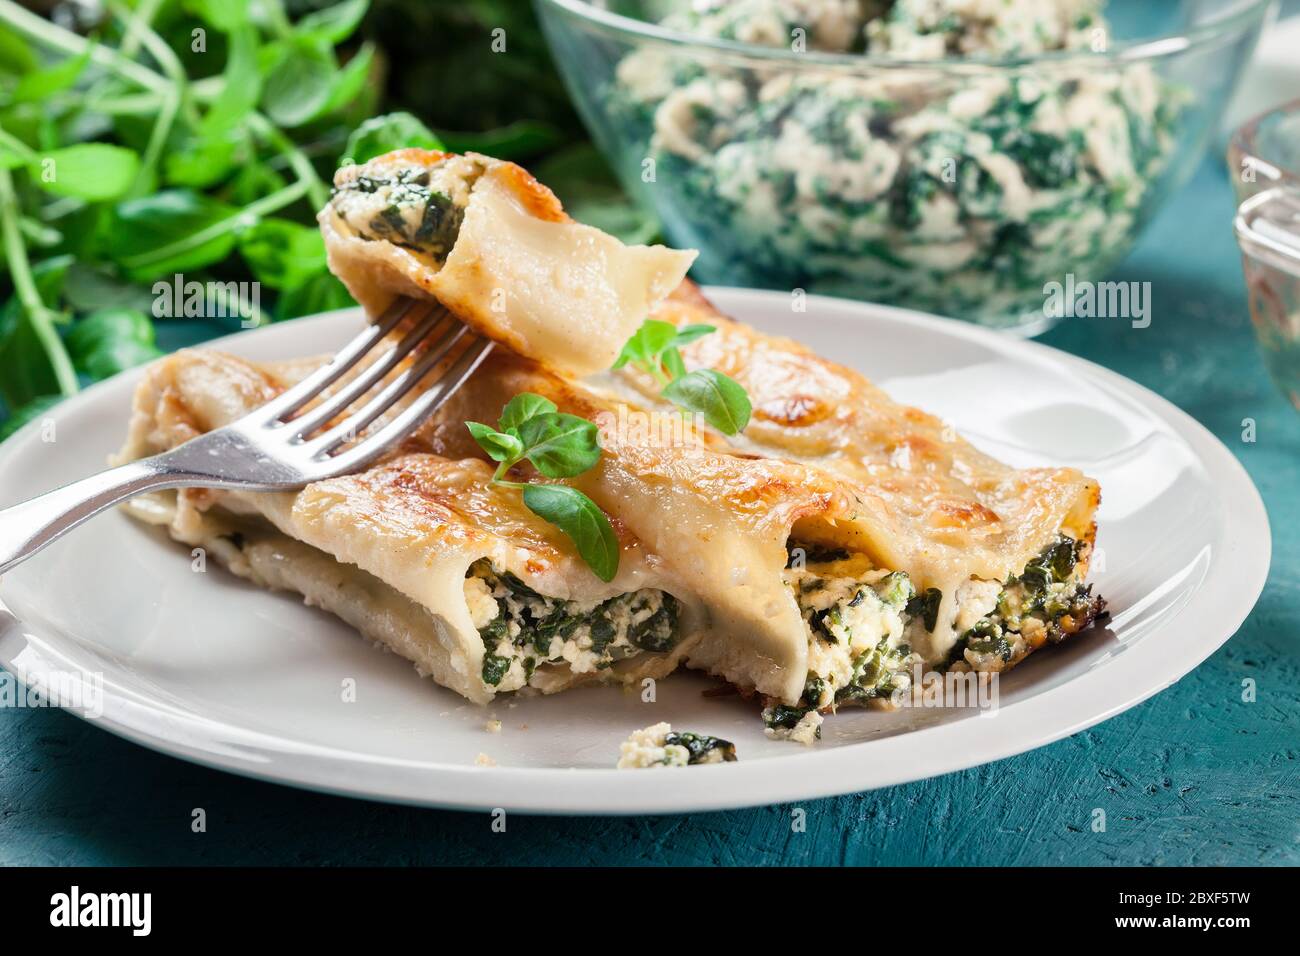 Portion of cannelloni stuffed with spinach and ricotta. Italian cuisine Stock Photo